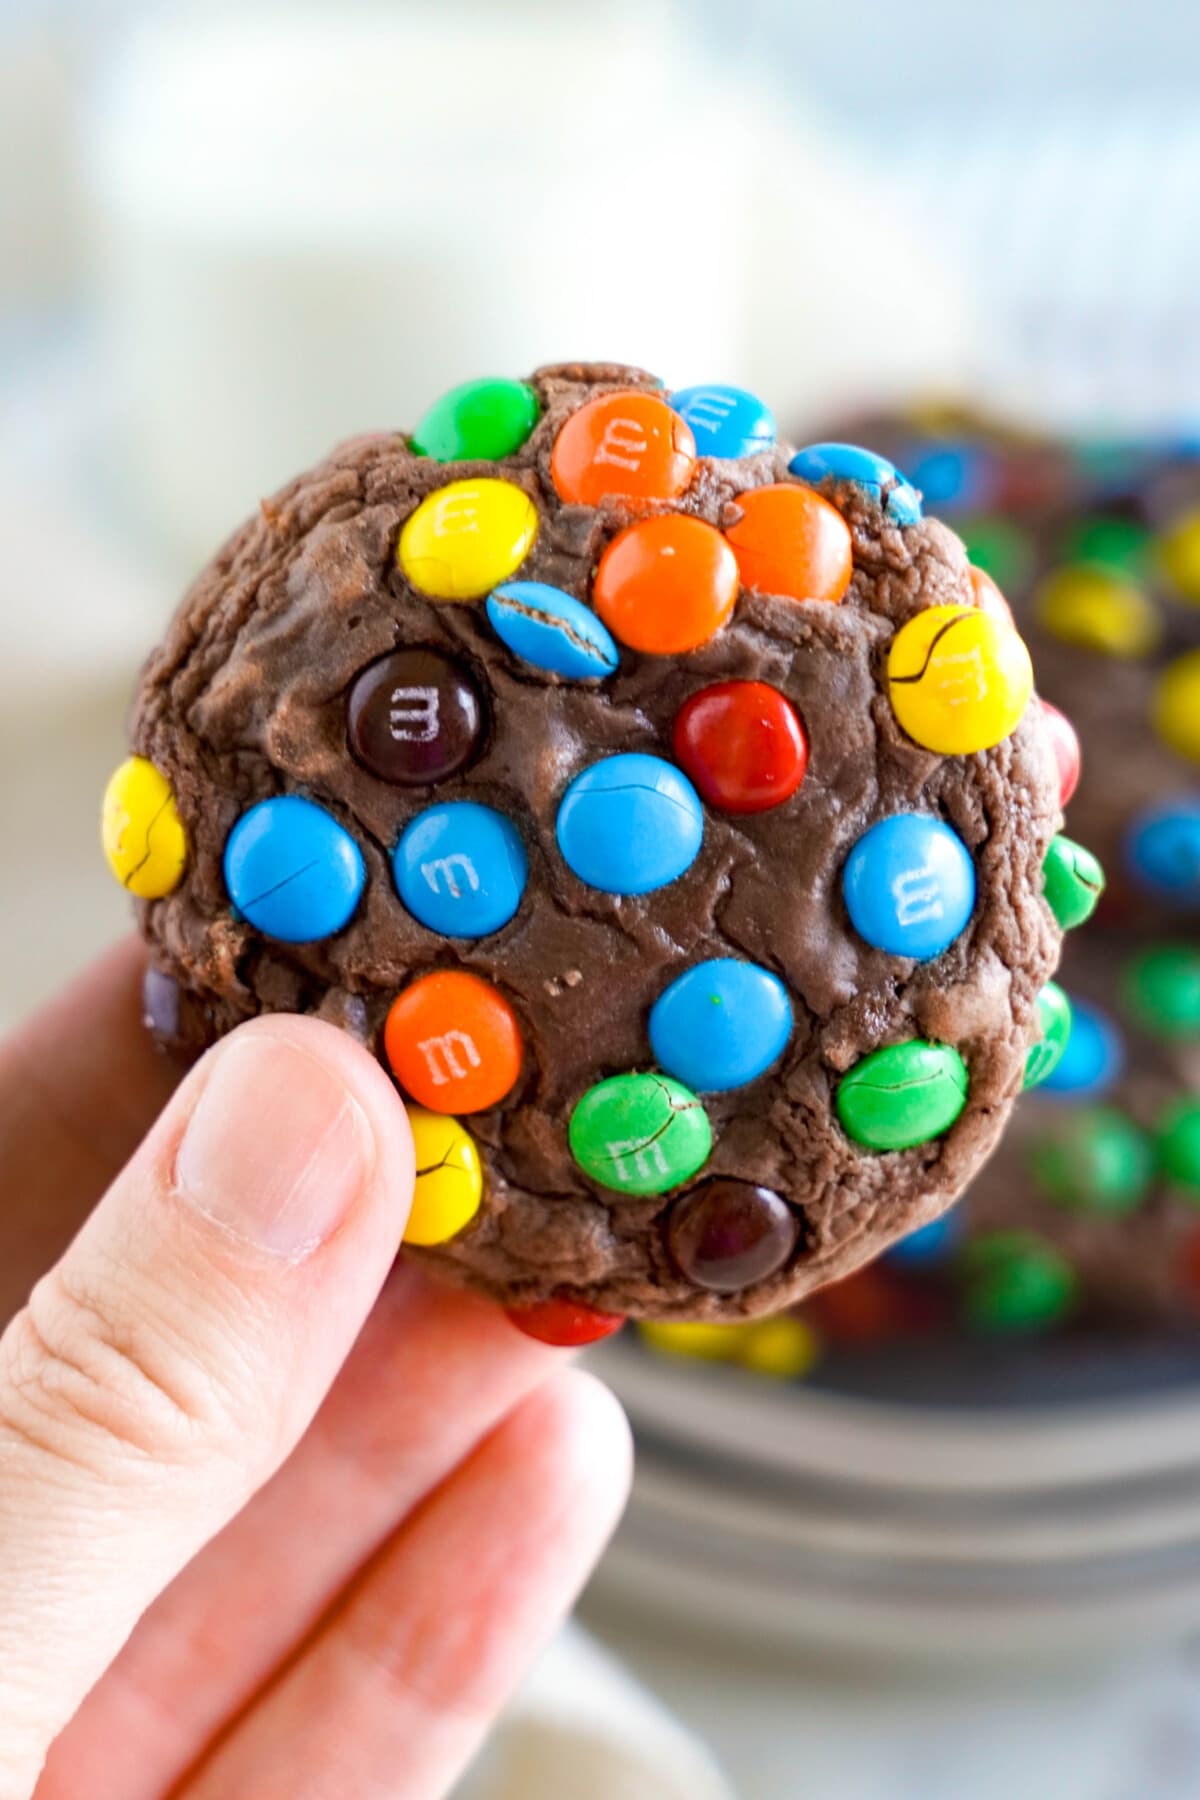 holding an M&M Brownie Cookie